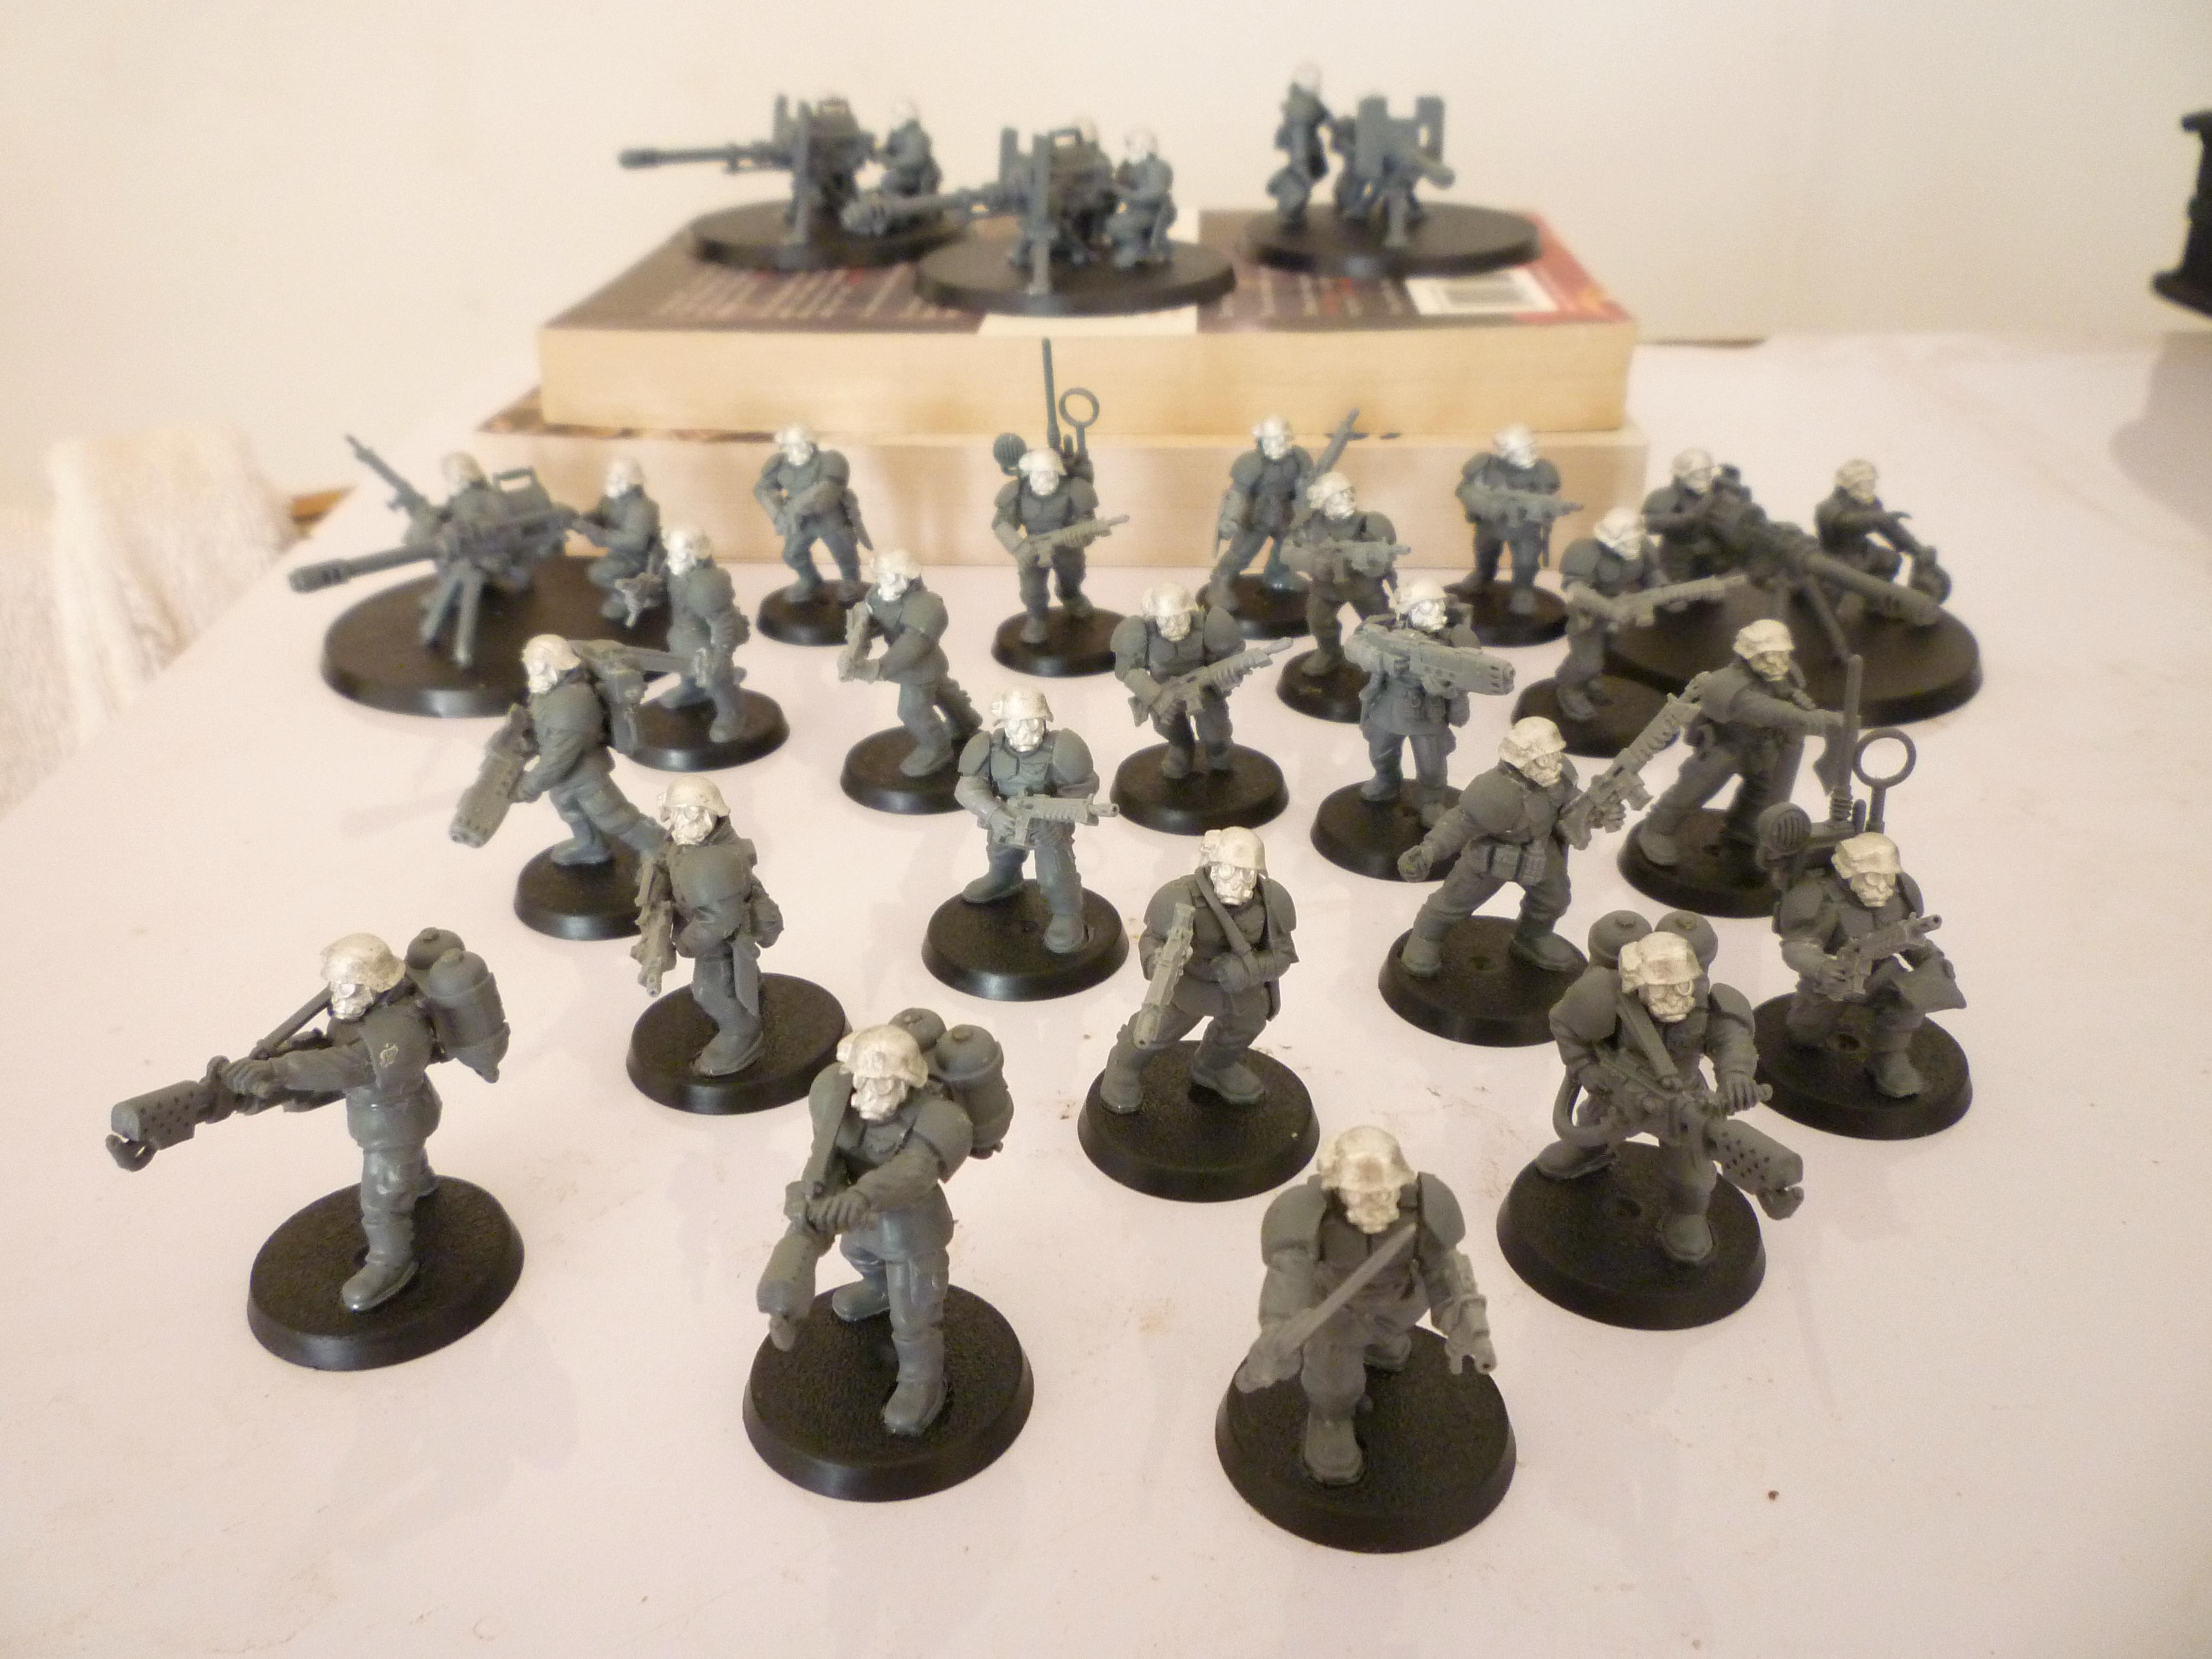 Cadians, Ig Infantry, Imperial Guard, Infantry, Pig Iron